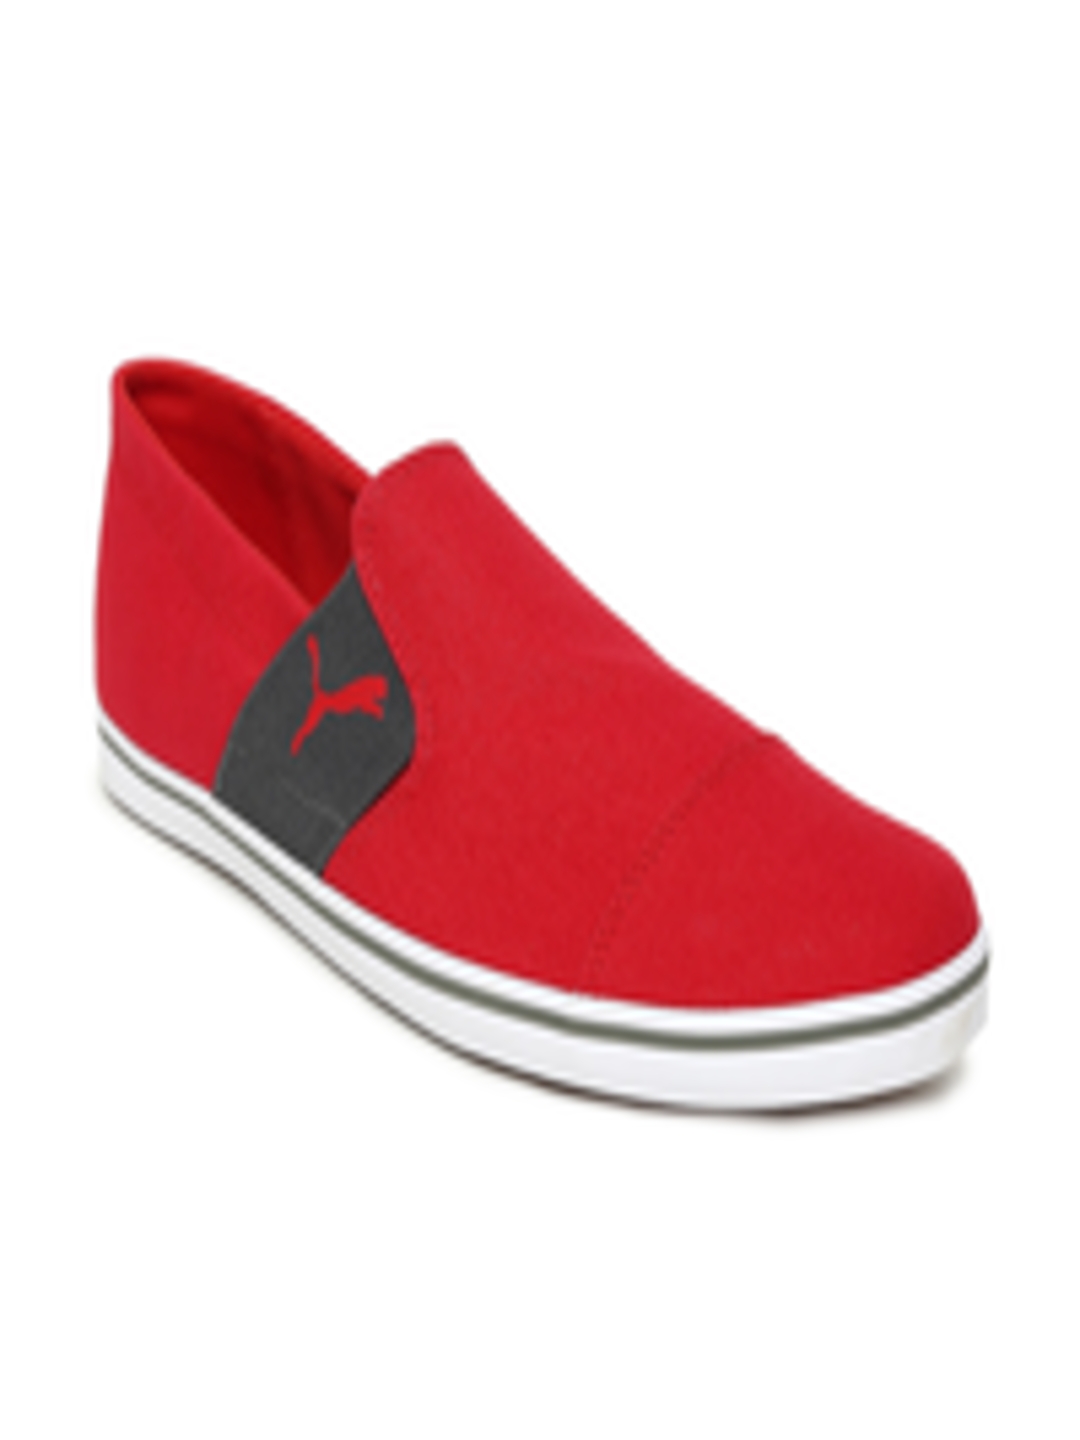 Buy Puma Unisex Red Elsu V2 Slip On Sneakers - Casual Shoes for Unisex ...